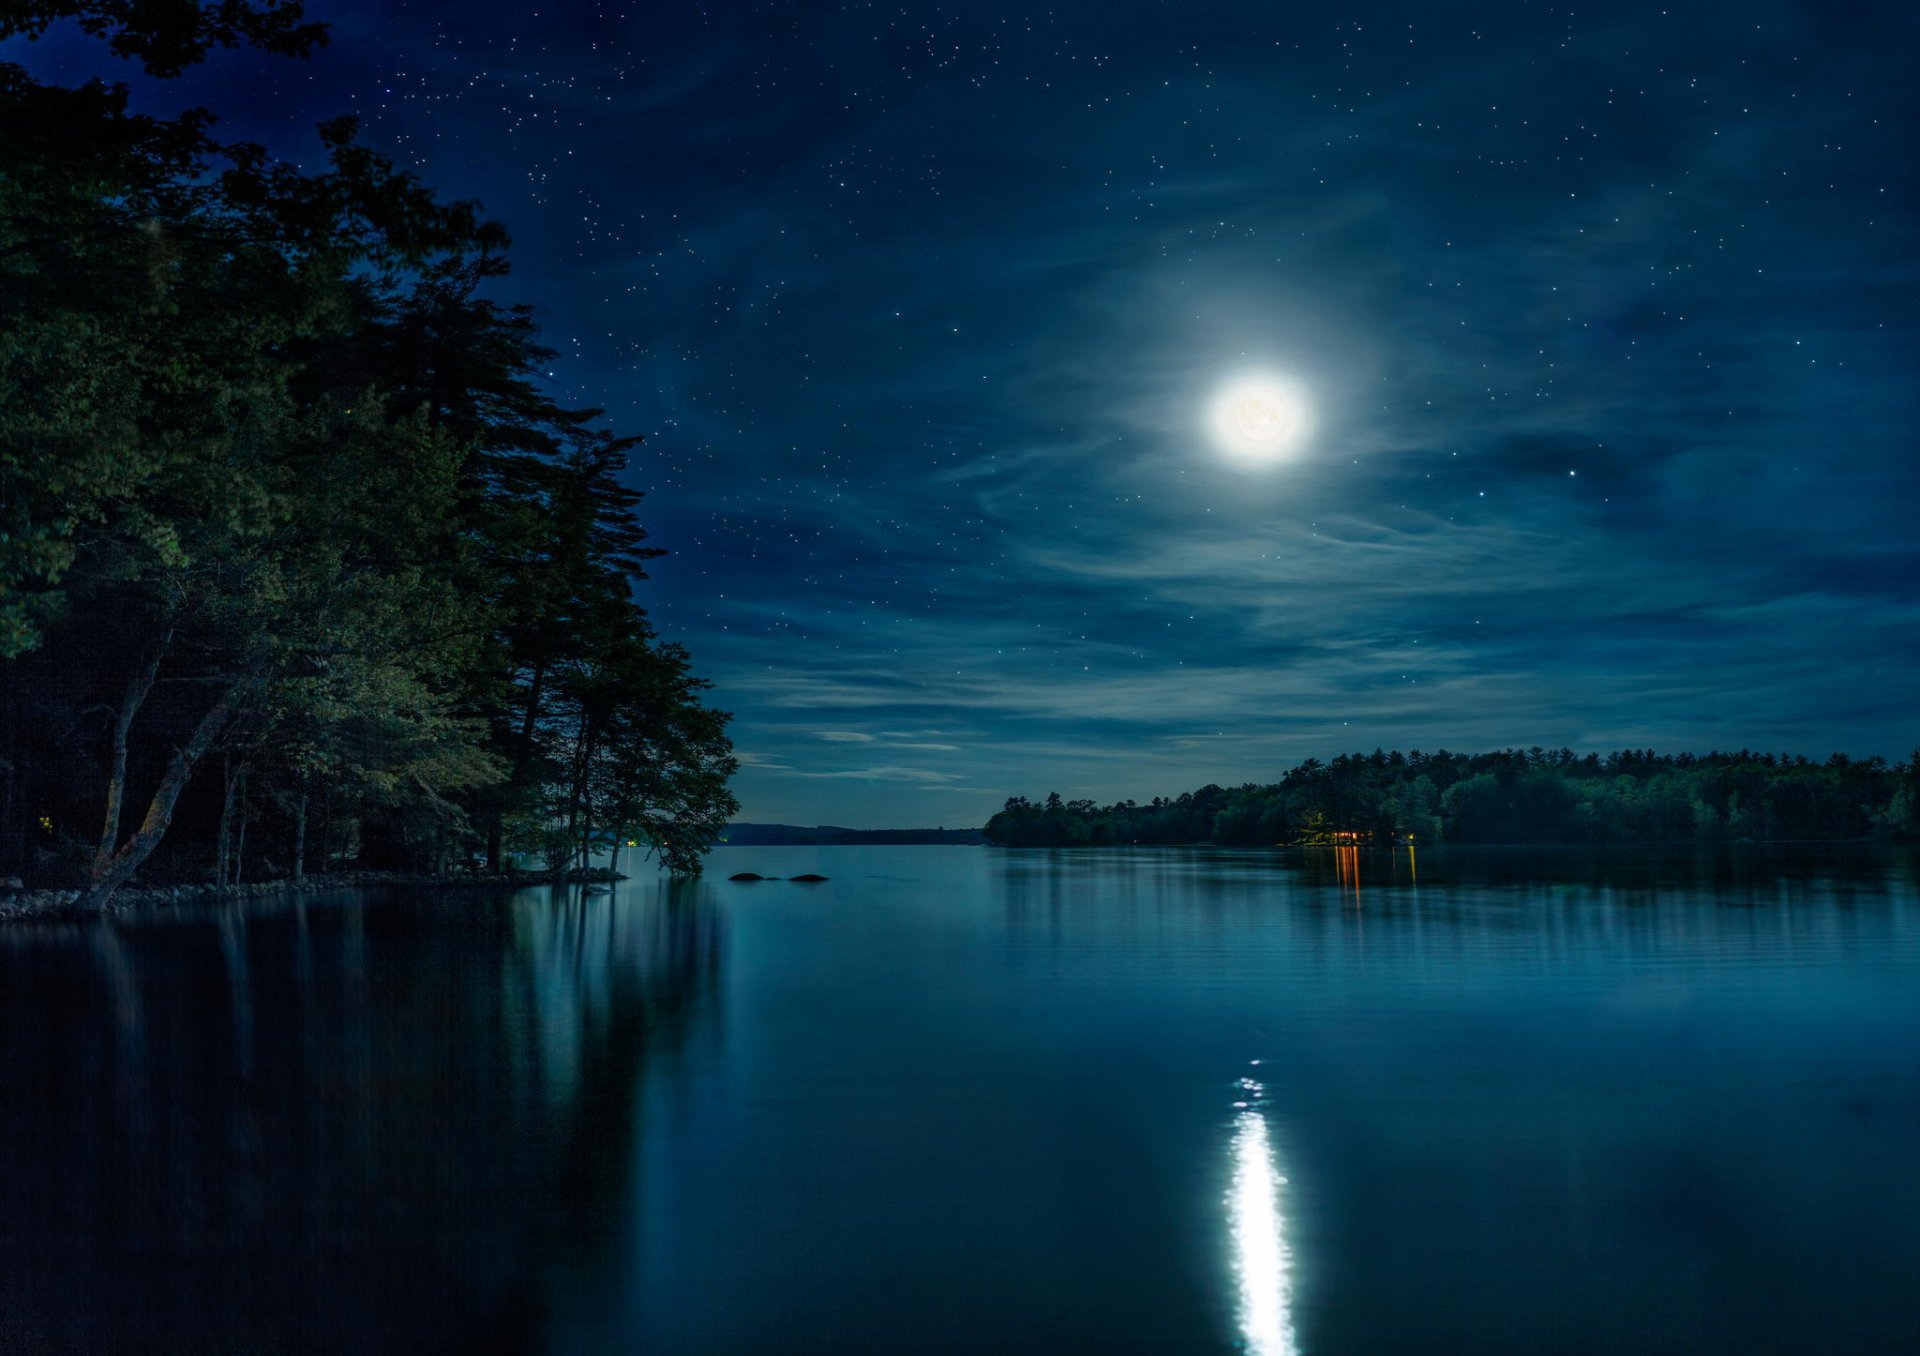 Hd Wallpaper Night Lake Moon Sky Star Nature Forest